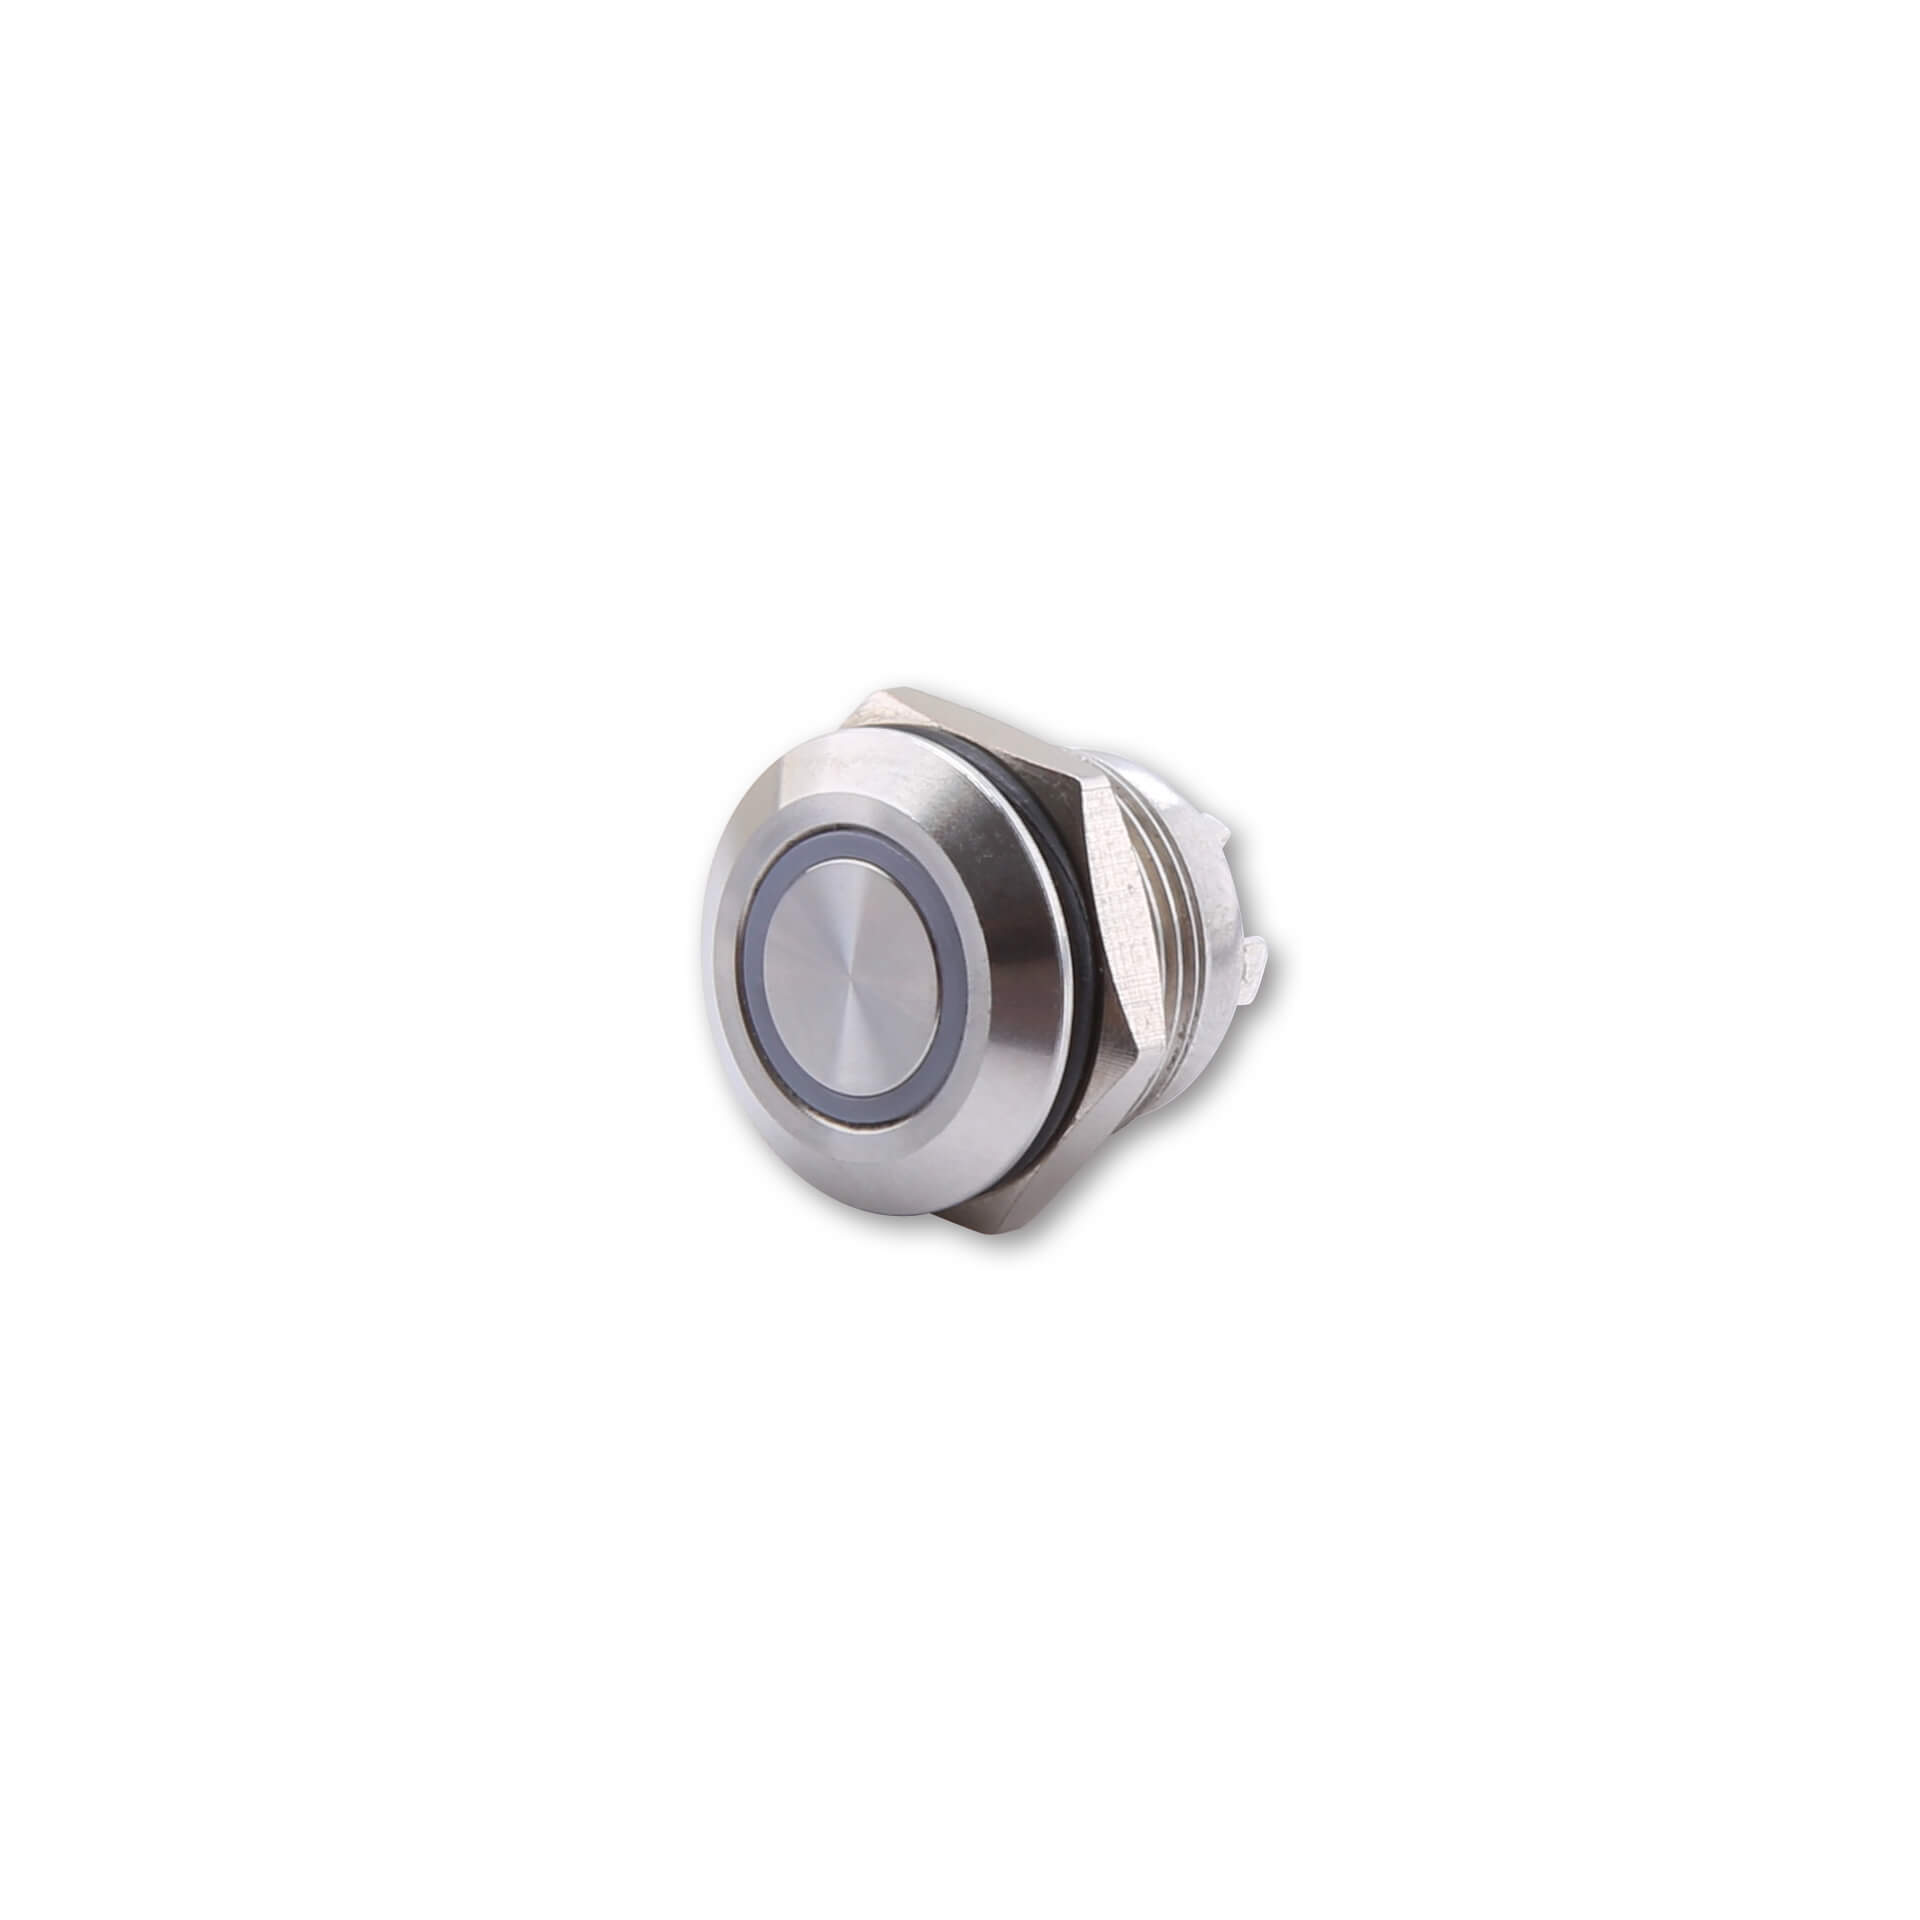 highsider Push button stainless steel with LED light ring